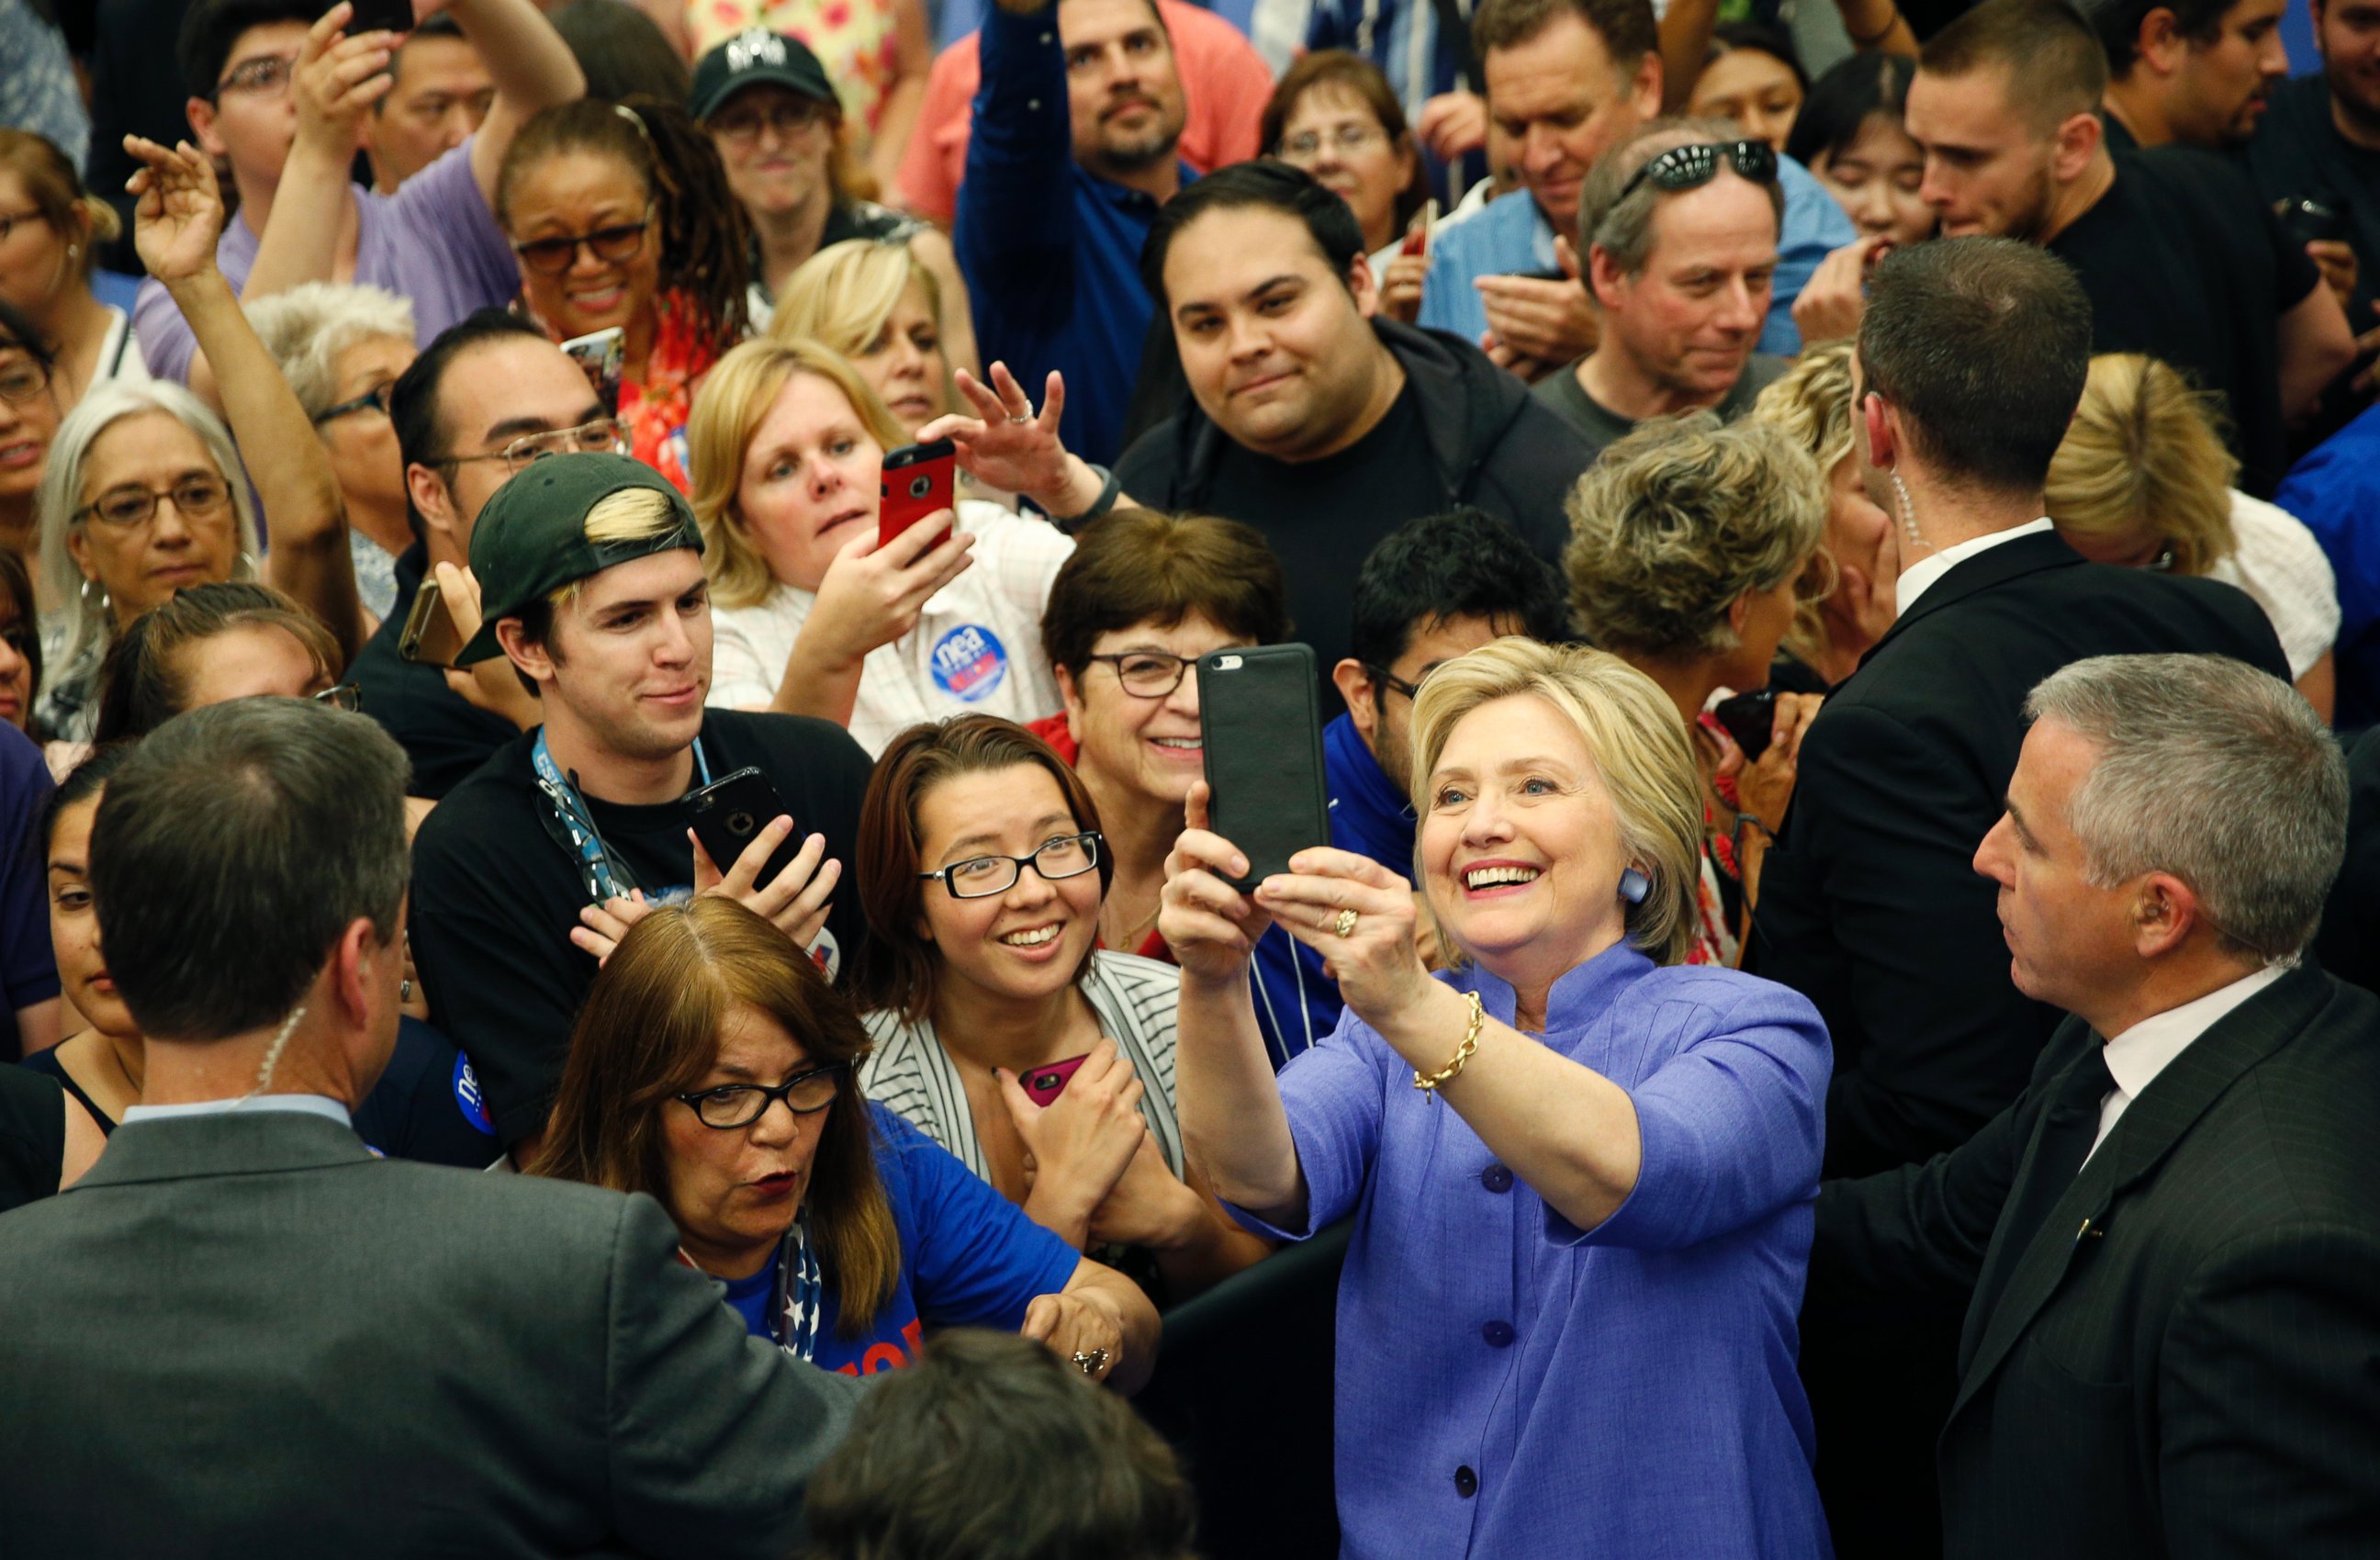 PHOTO: Hillary Clinton takes a selfie with supporters at a rally at California State University, San Bernardino, in San Bernardino, California, June 3, 2016.